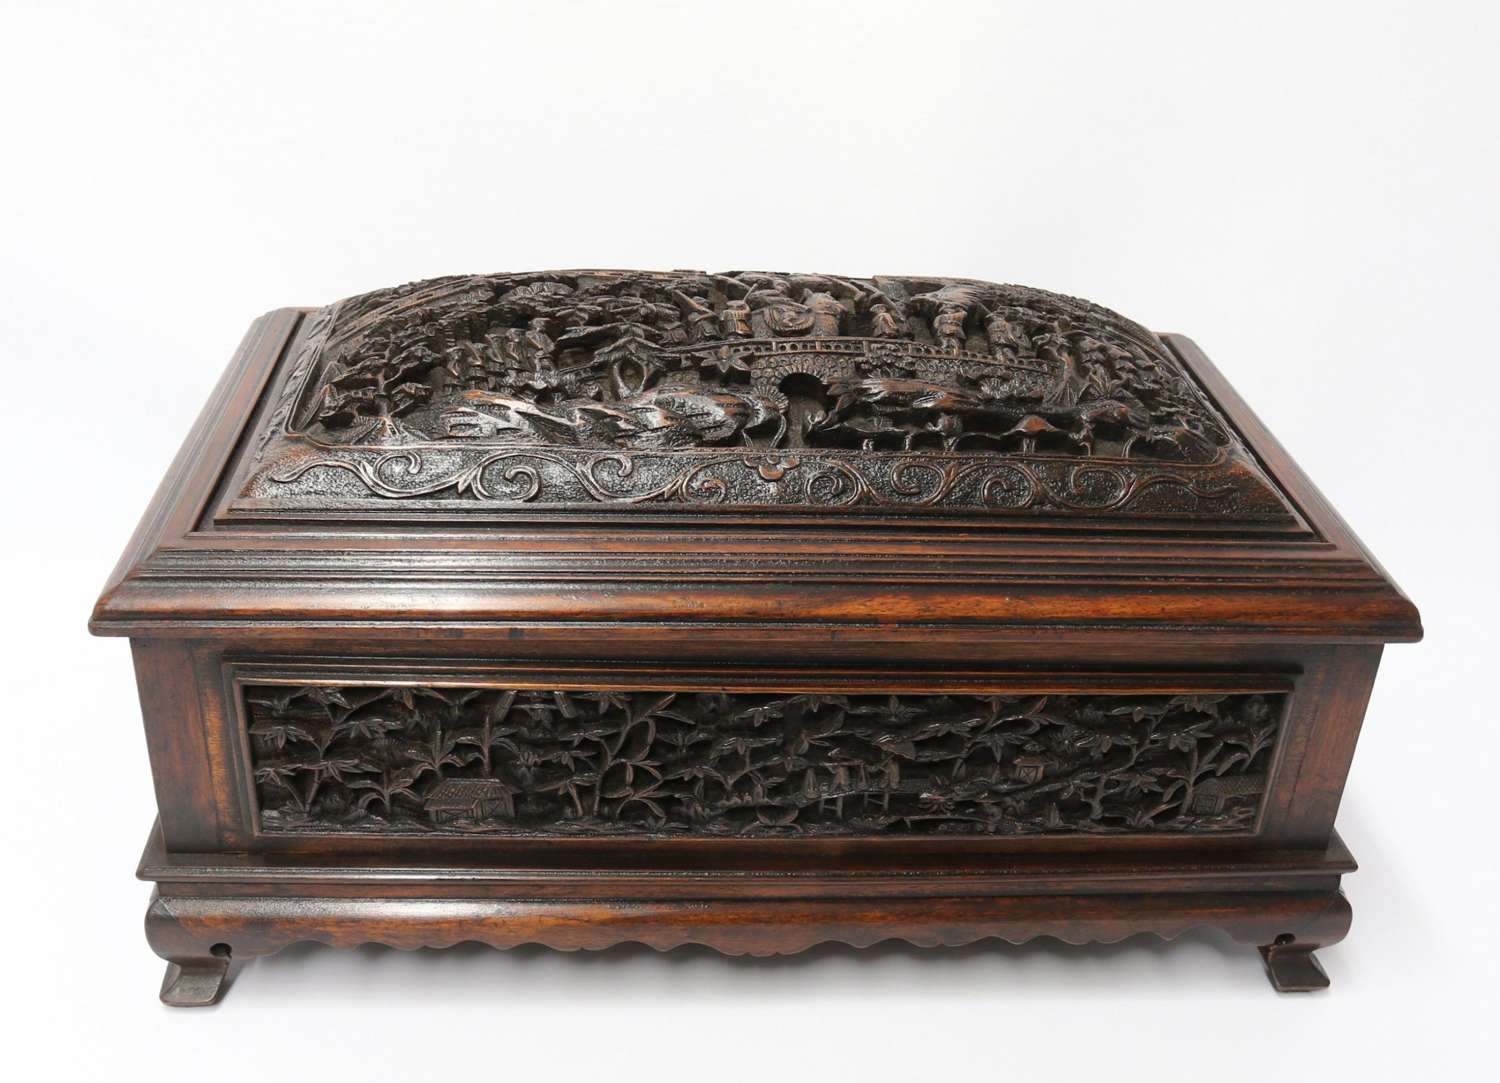 Chinese Carved Jewel Casket